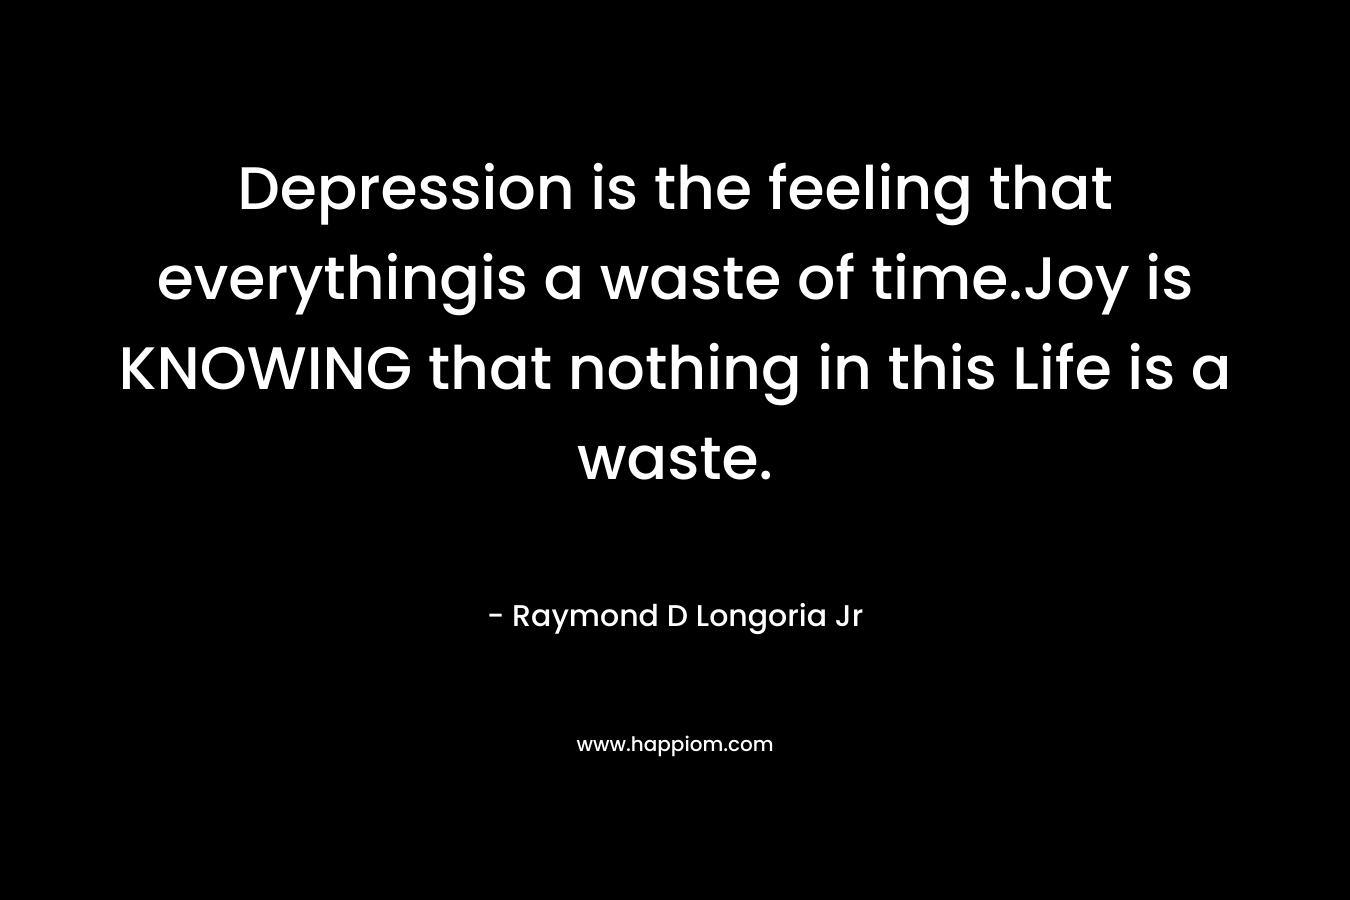 Depression is the feeling that everythingis a waste of time.Joy is KNOWING that nothing in this Life is a waste. – Raymond D Longoria Jr